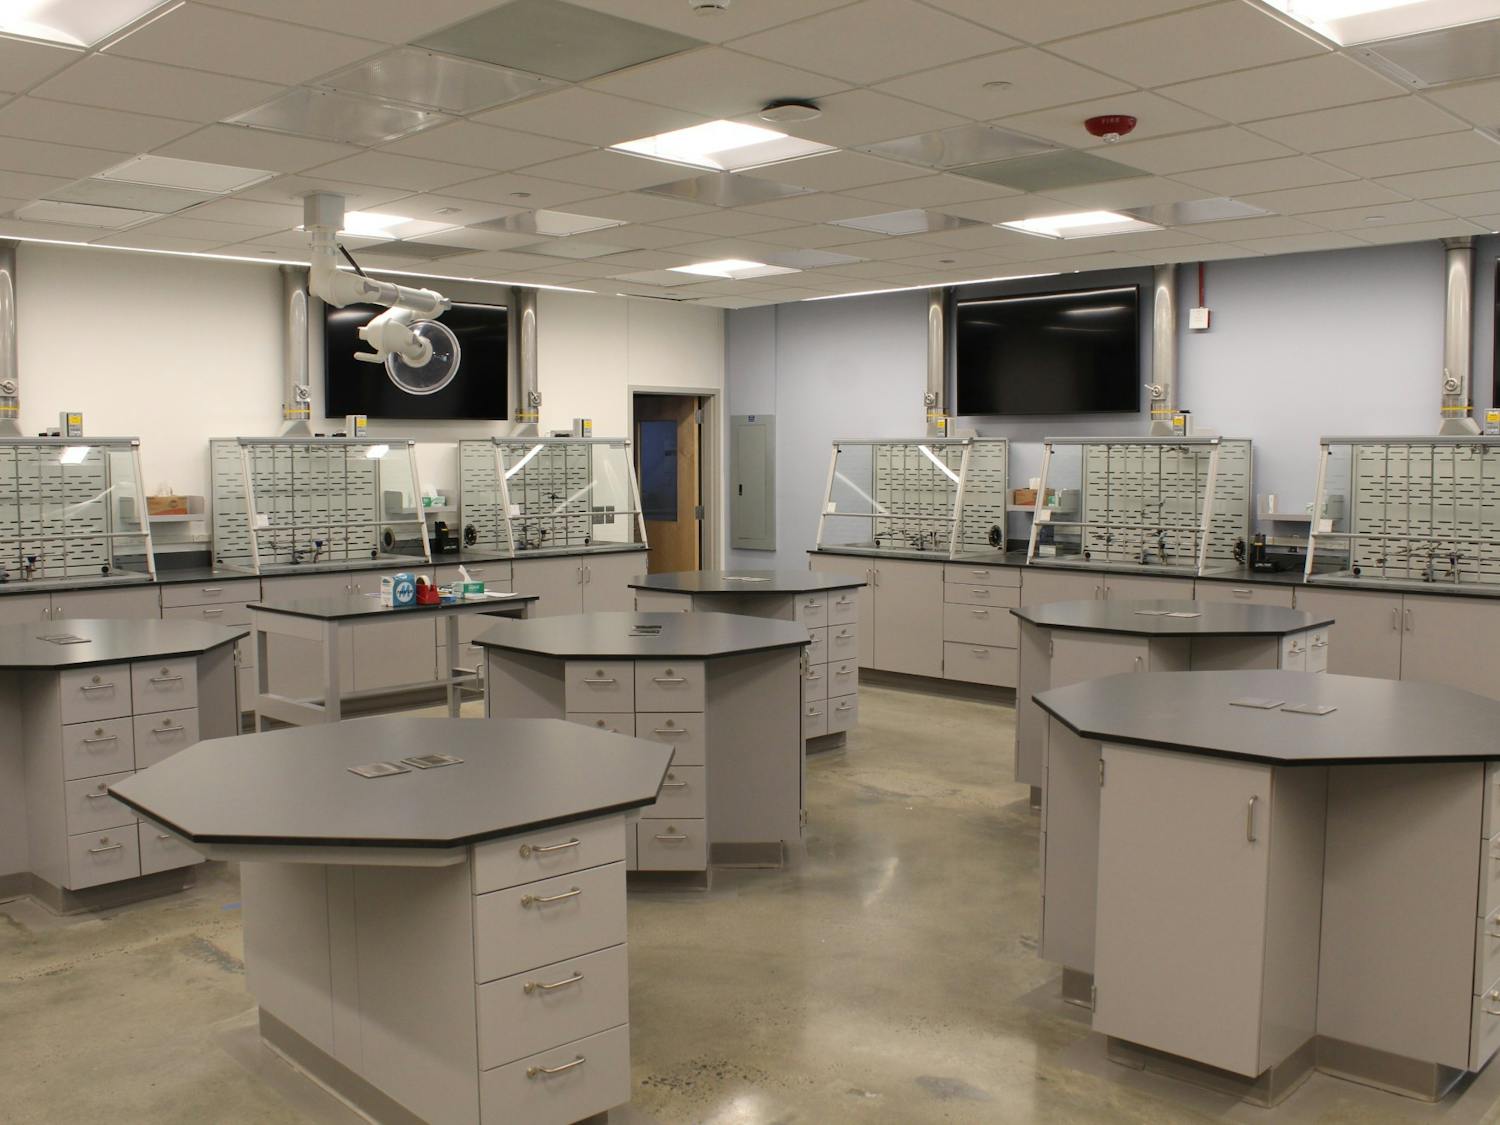 The recently renovated chemistry lab nicknamed “The Lab of the Future” has been designed to promote collaboration and communication between students through an open floorplan, round tables and monitors where students can display their data.